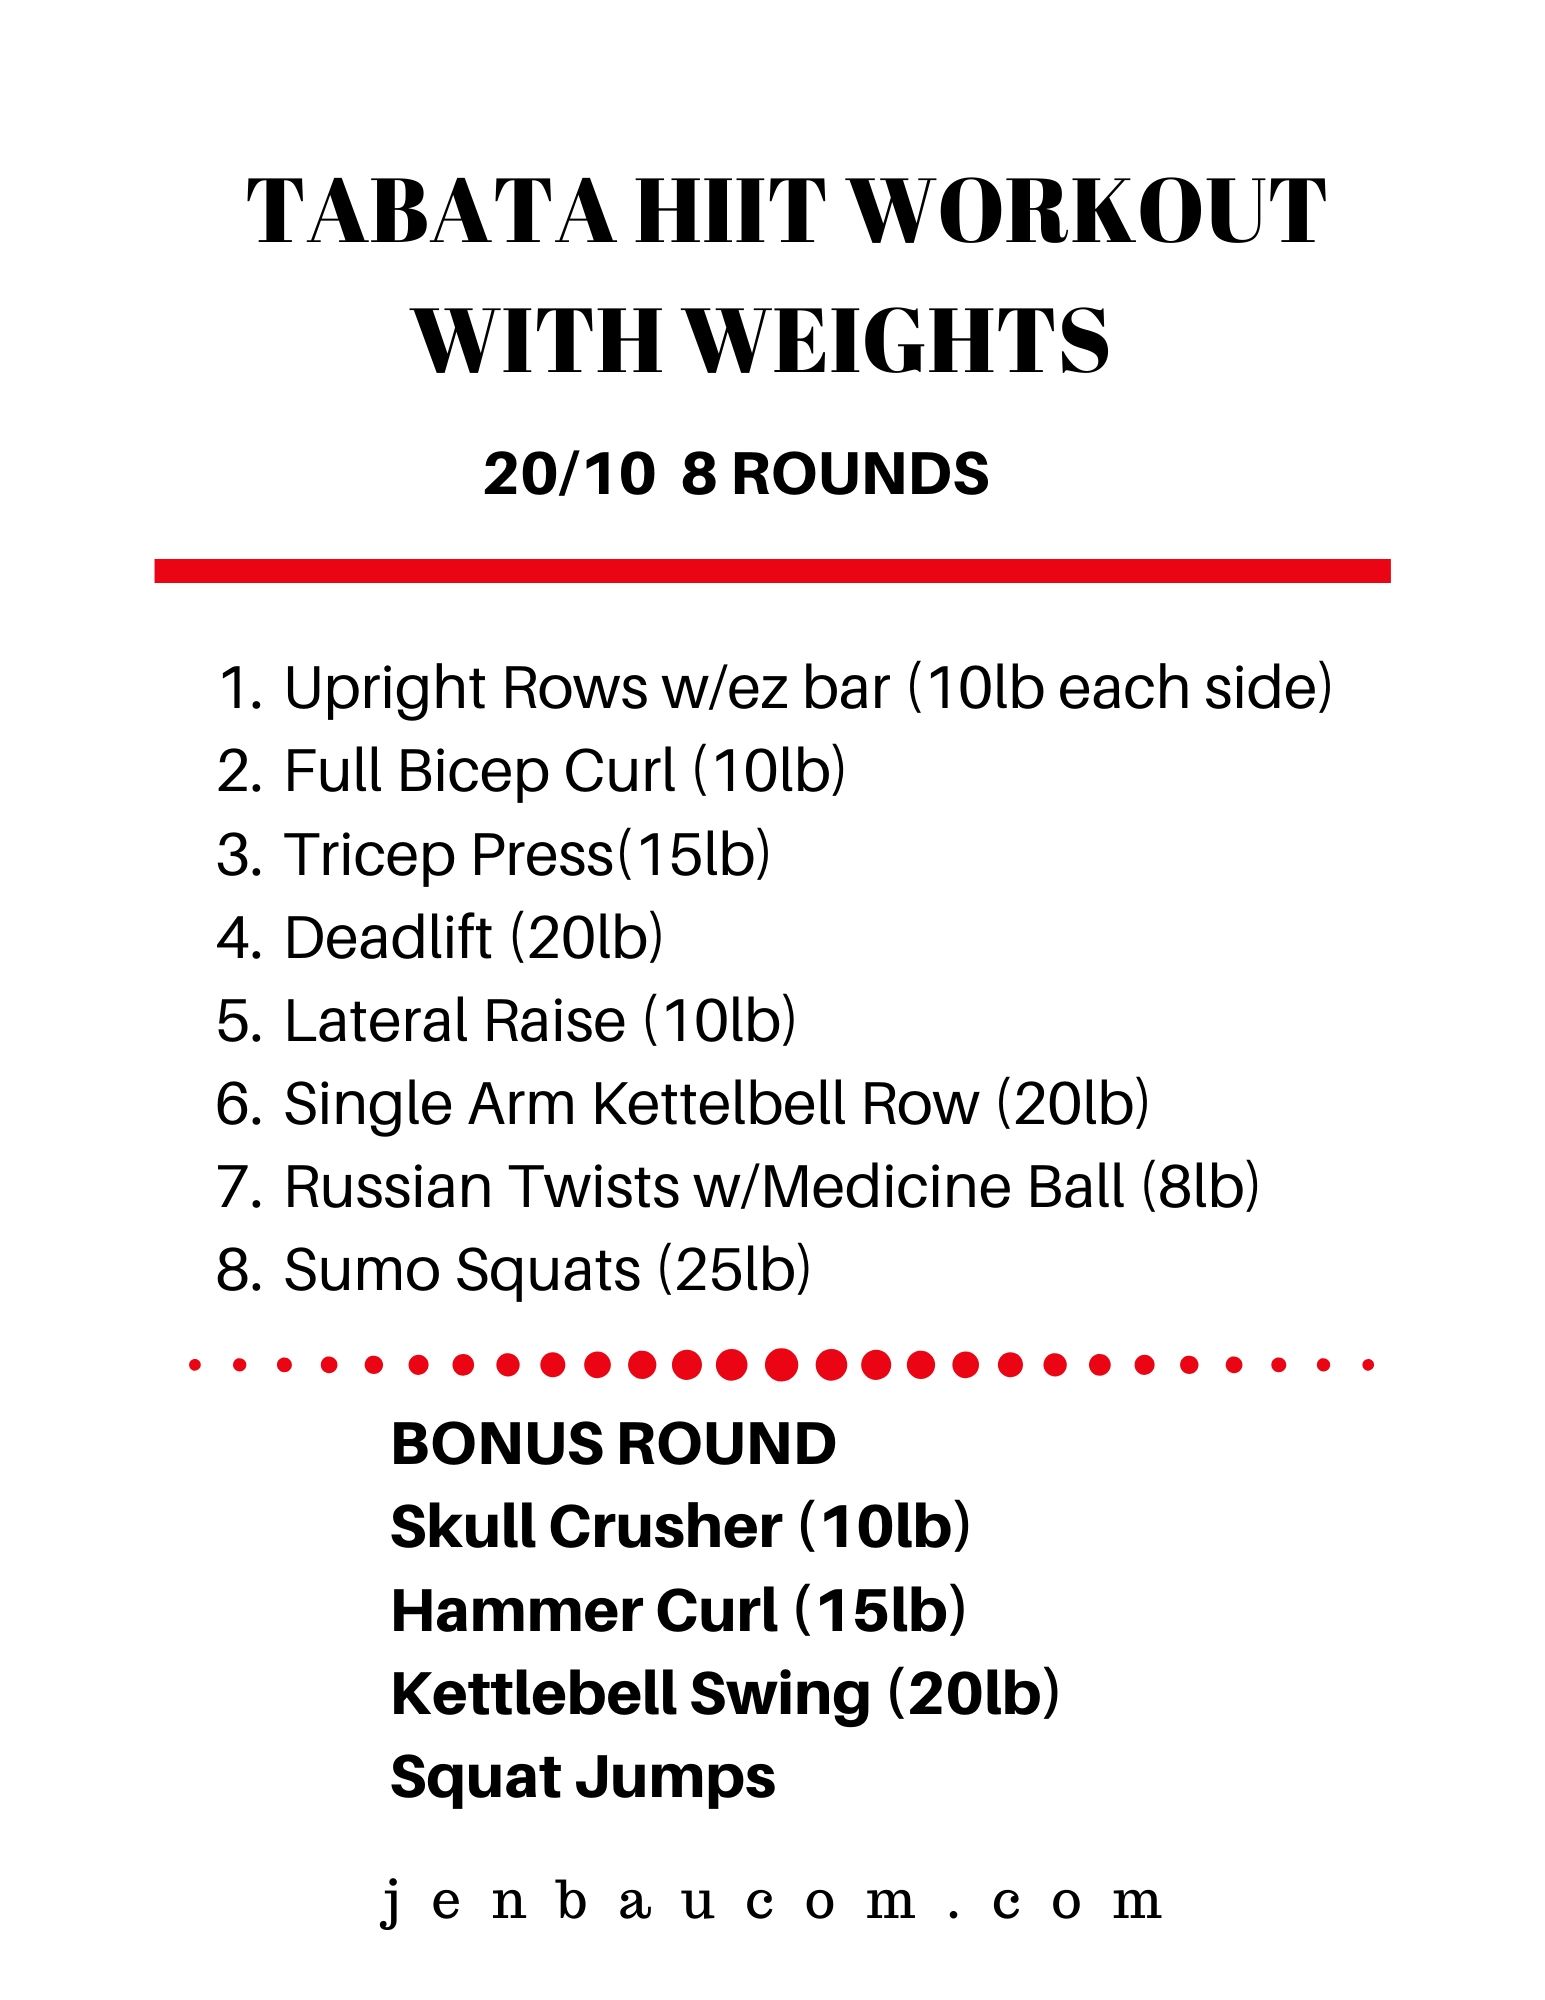 Tabata Workout with weights 